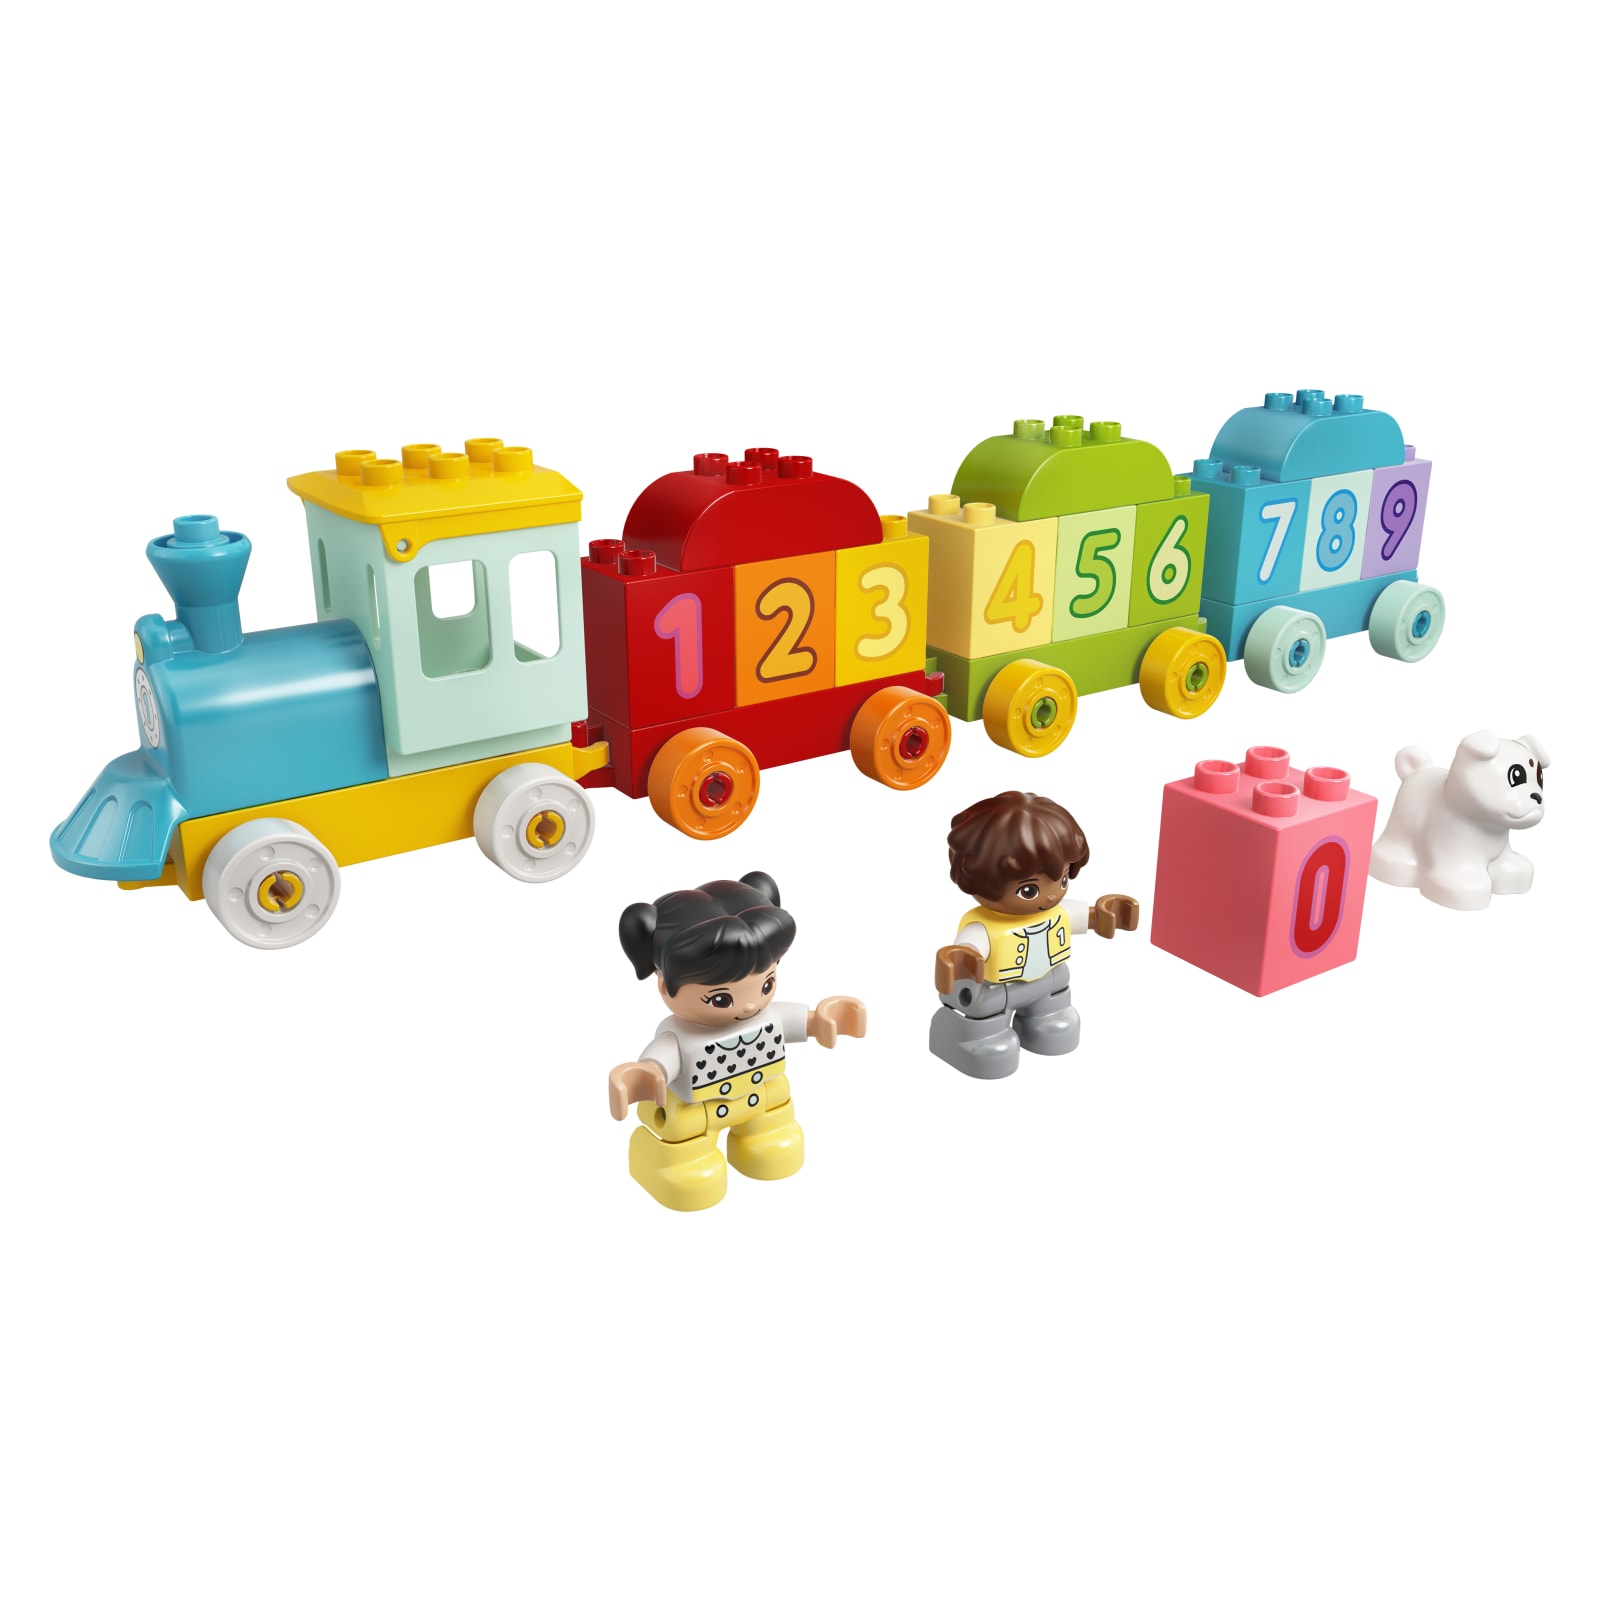 DUPLO® My First Number Train - Learn To Count Set by LEGO at Fleet Farm